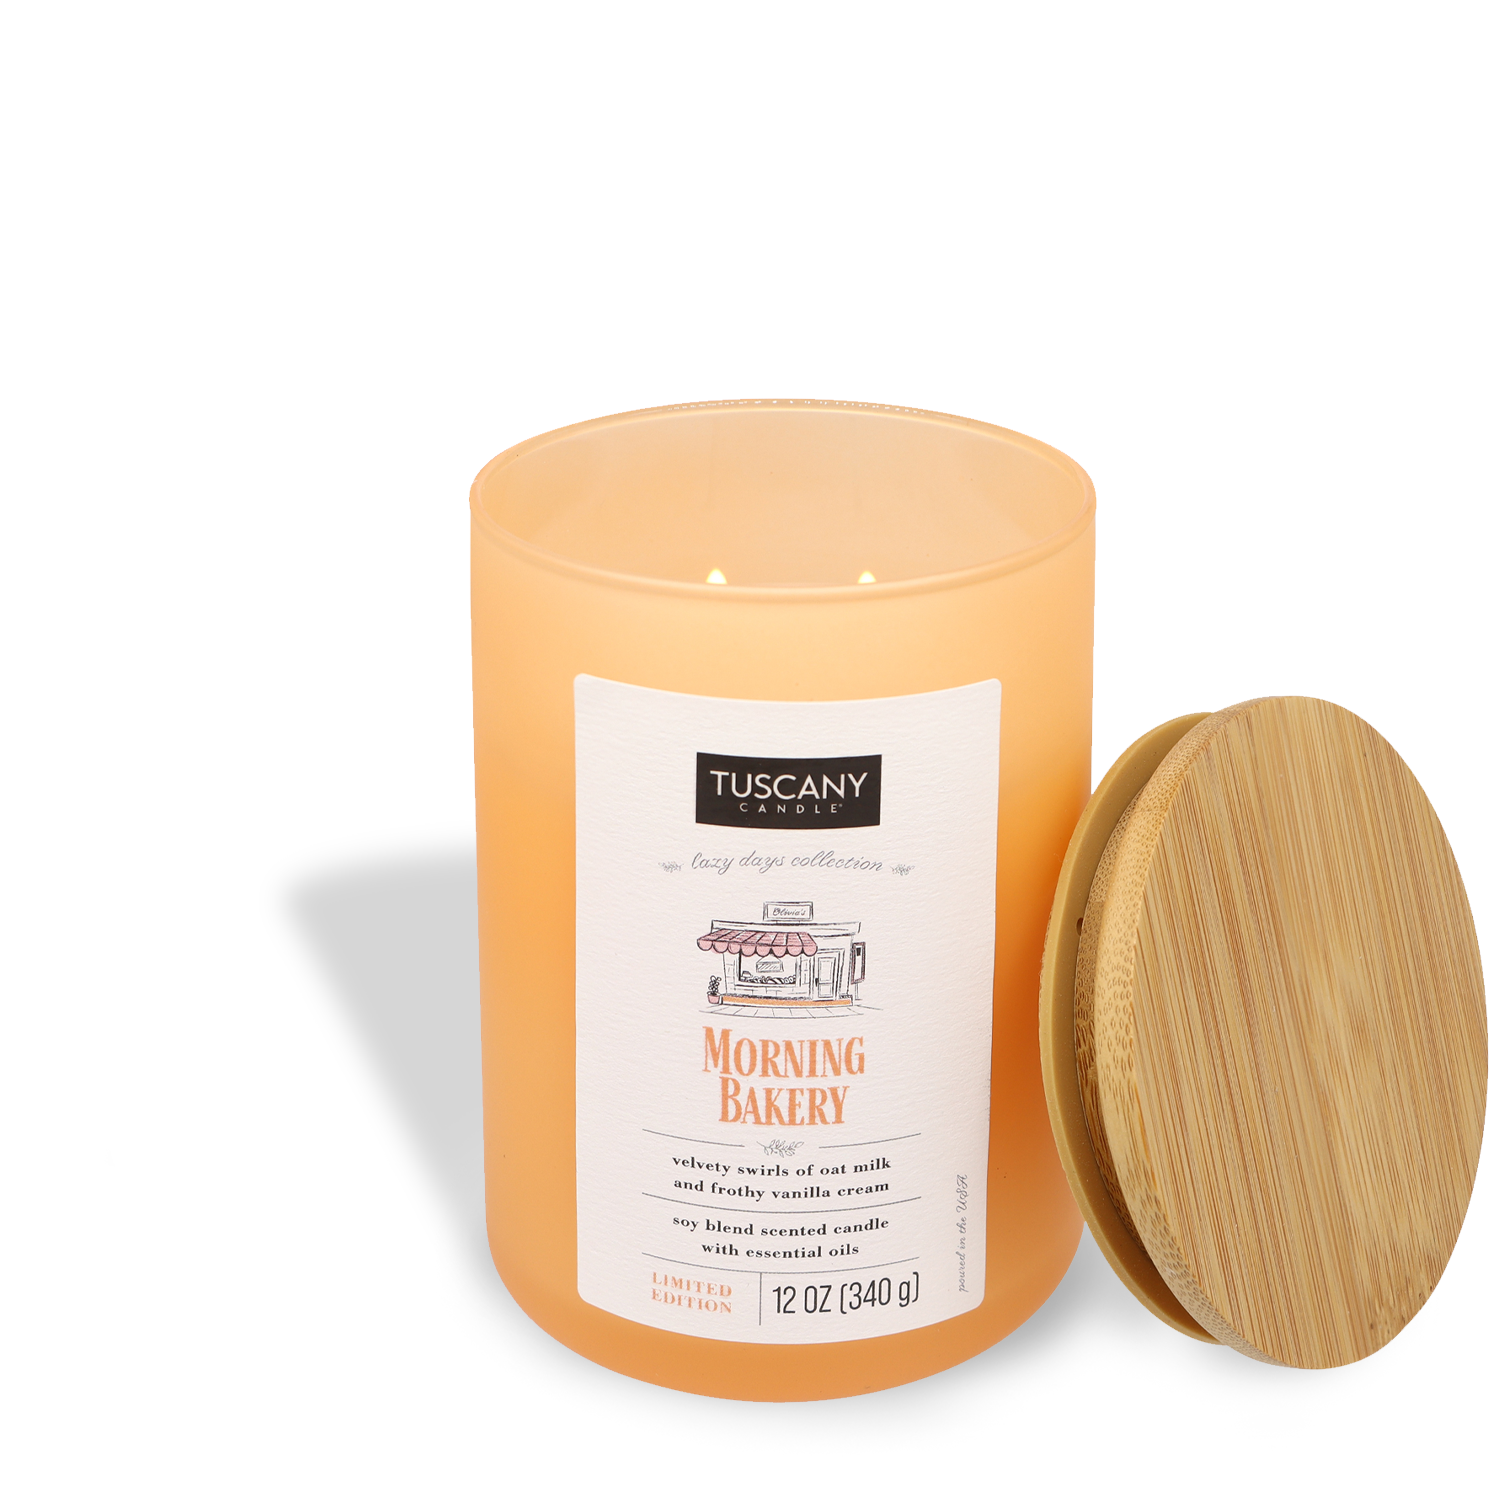 Morning Bakery scented candle with Tuscany Candle® SEASONAL label and wooden lid on a white background.